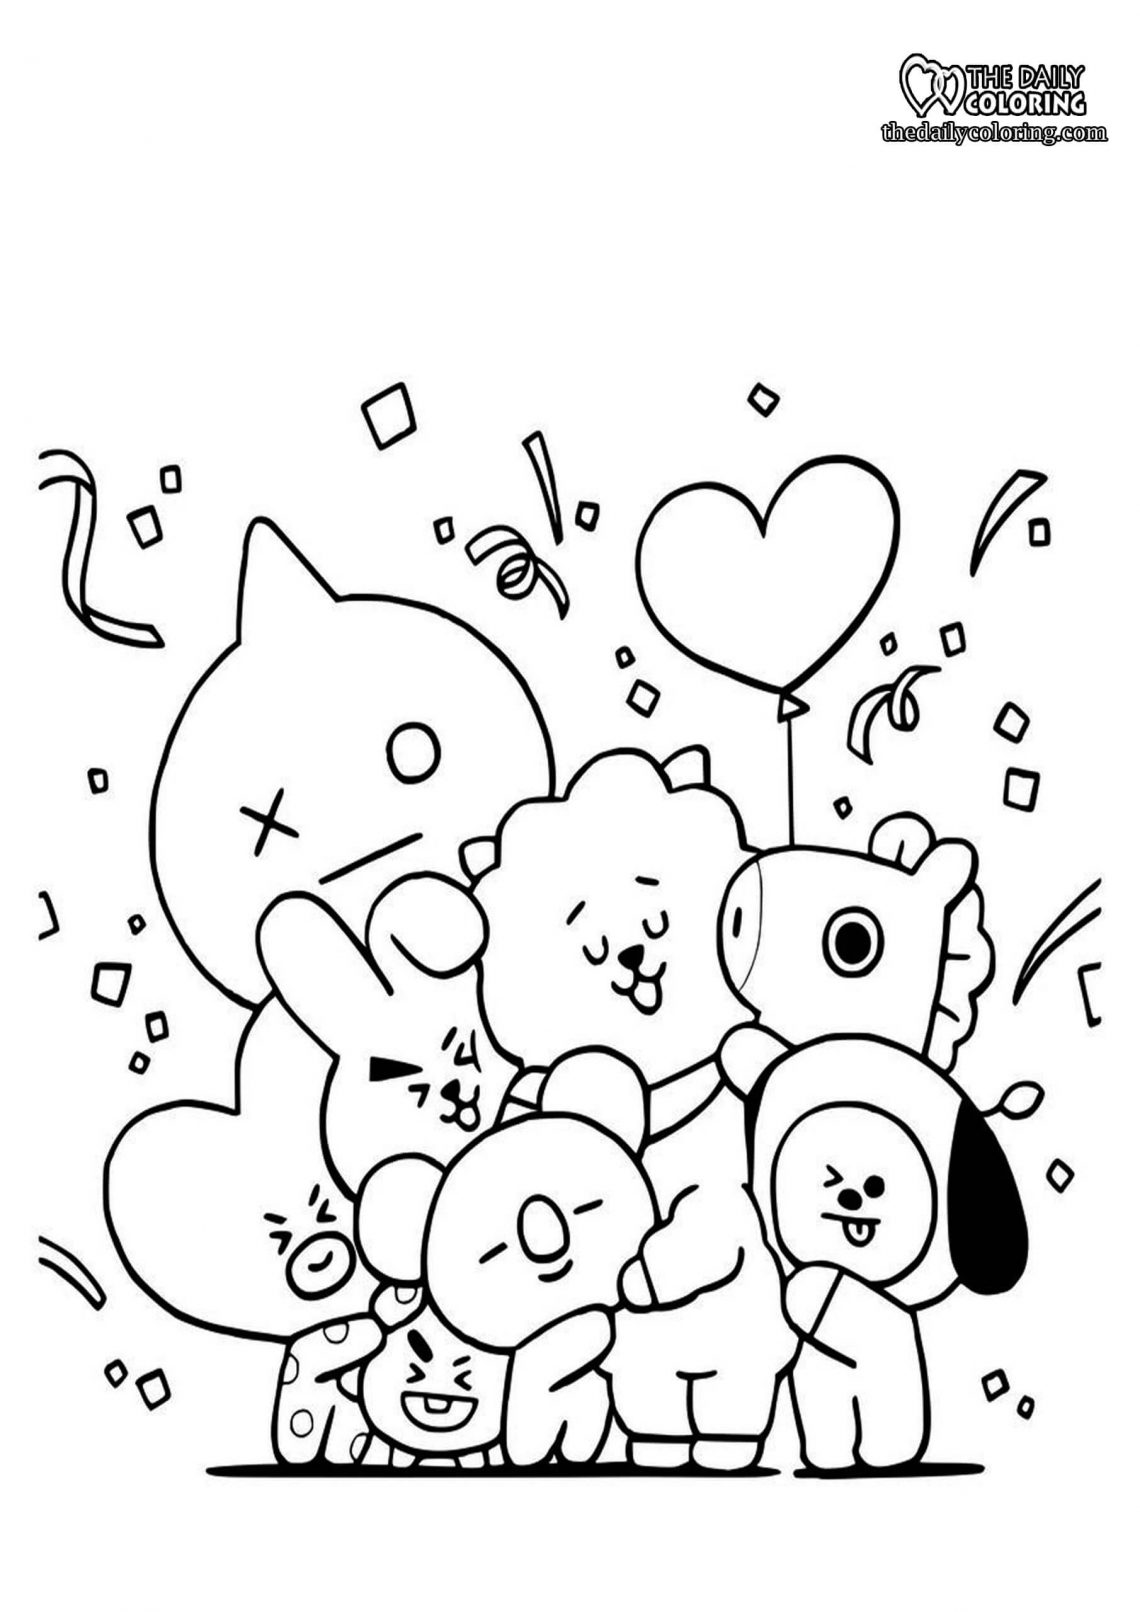 BT21 Coloring Pages - The Daily Coloring